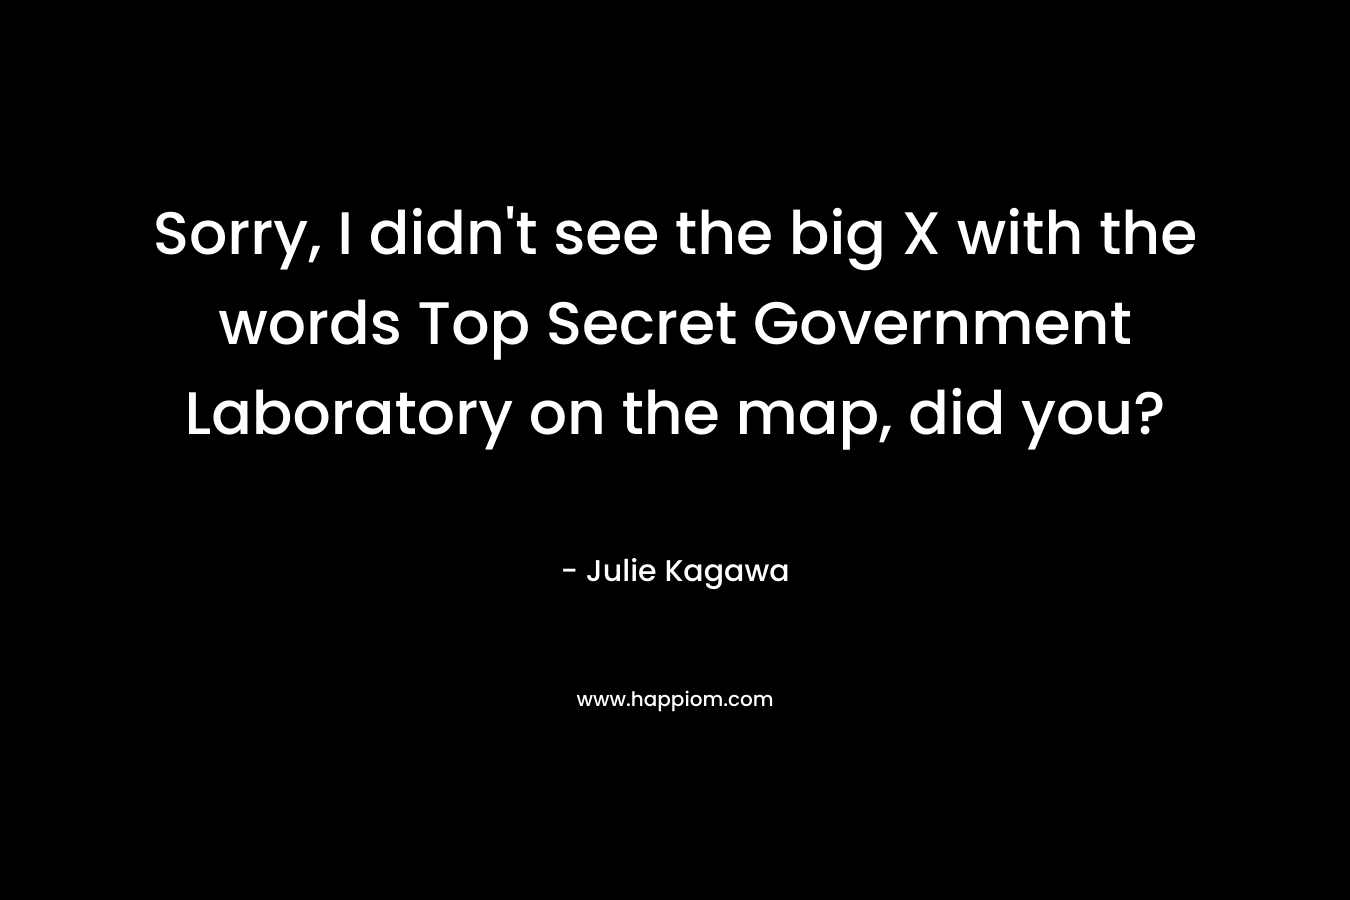 Sorry, I didn’t see the big X with the words Top Secret Government Laboratory on the map, did you? – Julie Kagawa